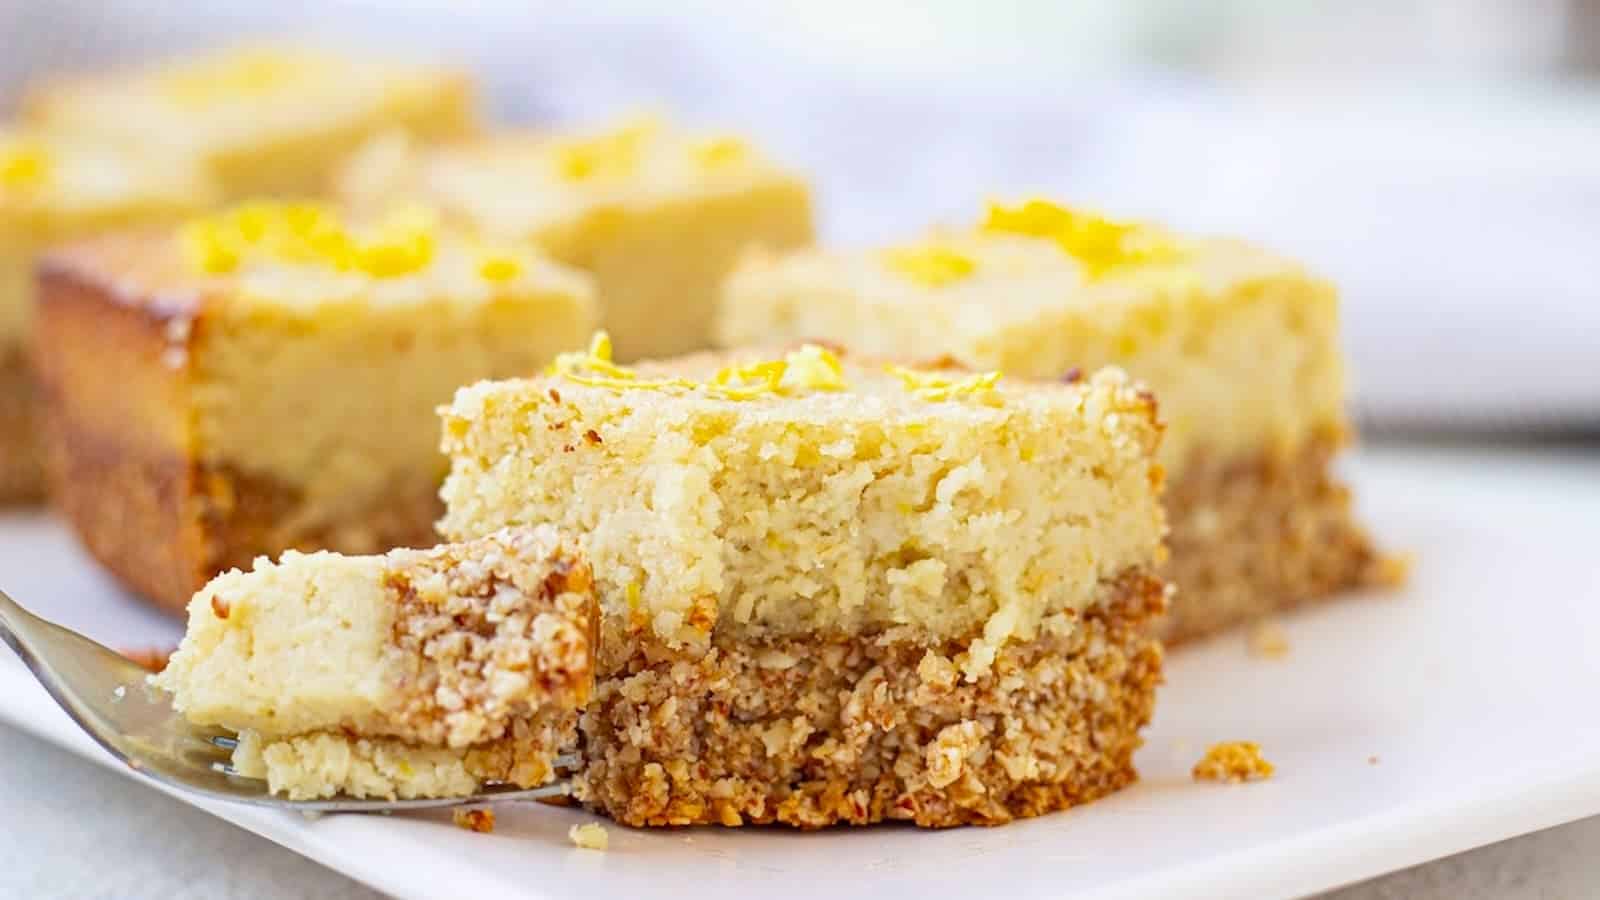 Protein lemon bars bites on a plate with a fork.